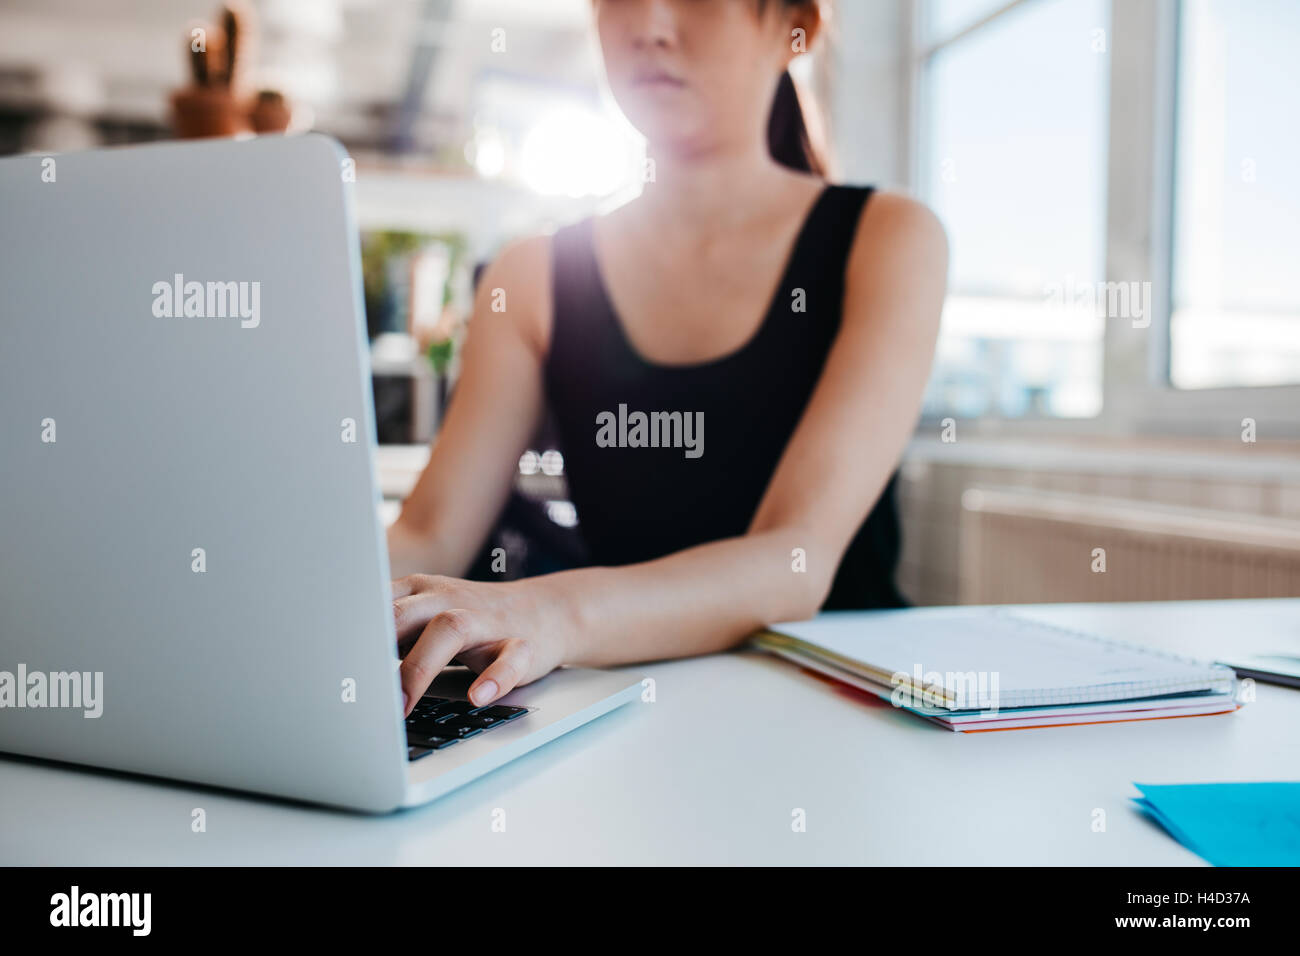 Cropped shot of woman working on laptop at office. Focus on hands of female typing on laptop keyboard. Stock Photo